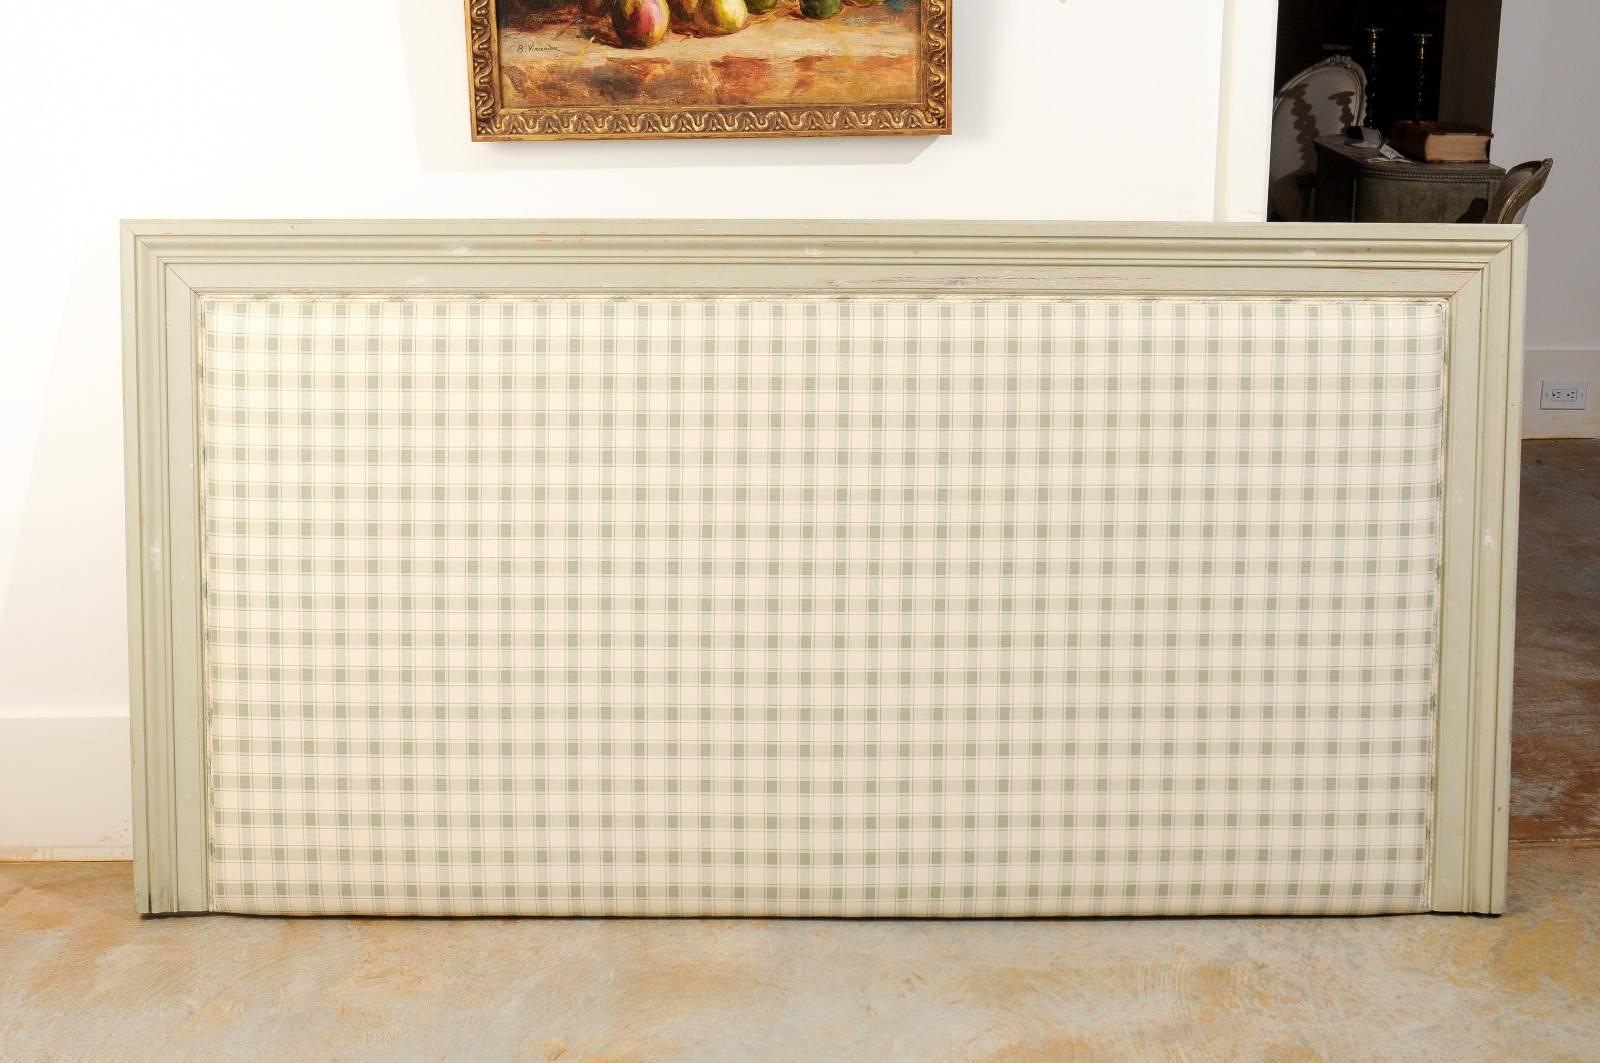 A king-size upholstered headboard made from a French antique door molding and covered in plaid fabric. This contemporary headboard features an antique French molded wooden door molding painted in a light color. The clean, simple lines of this wooden